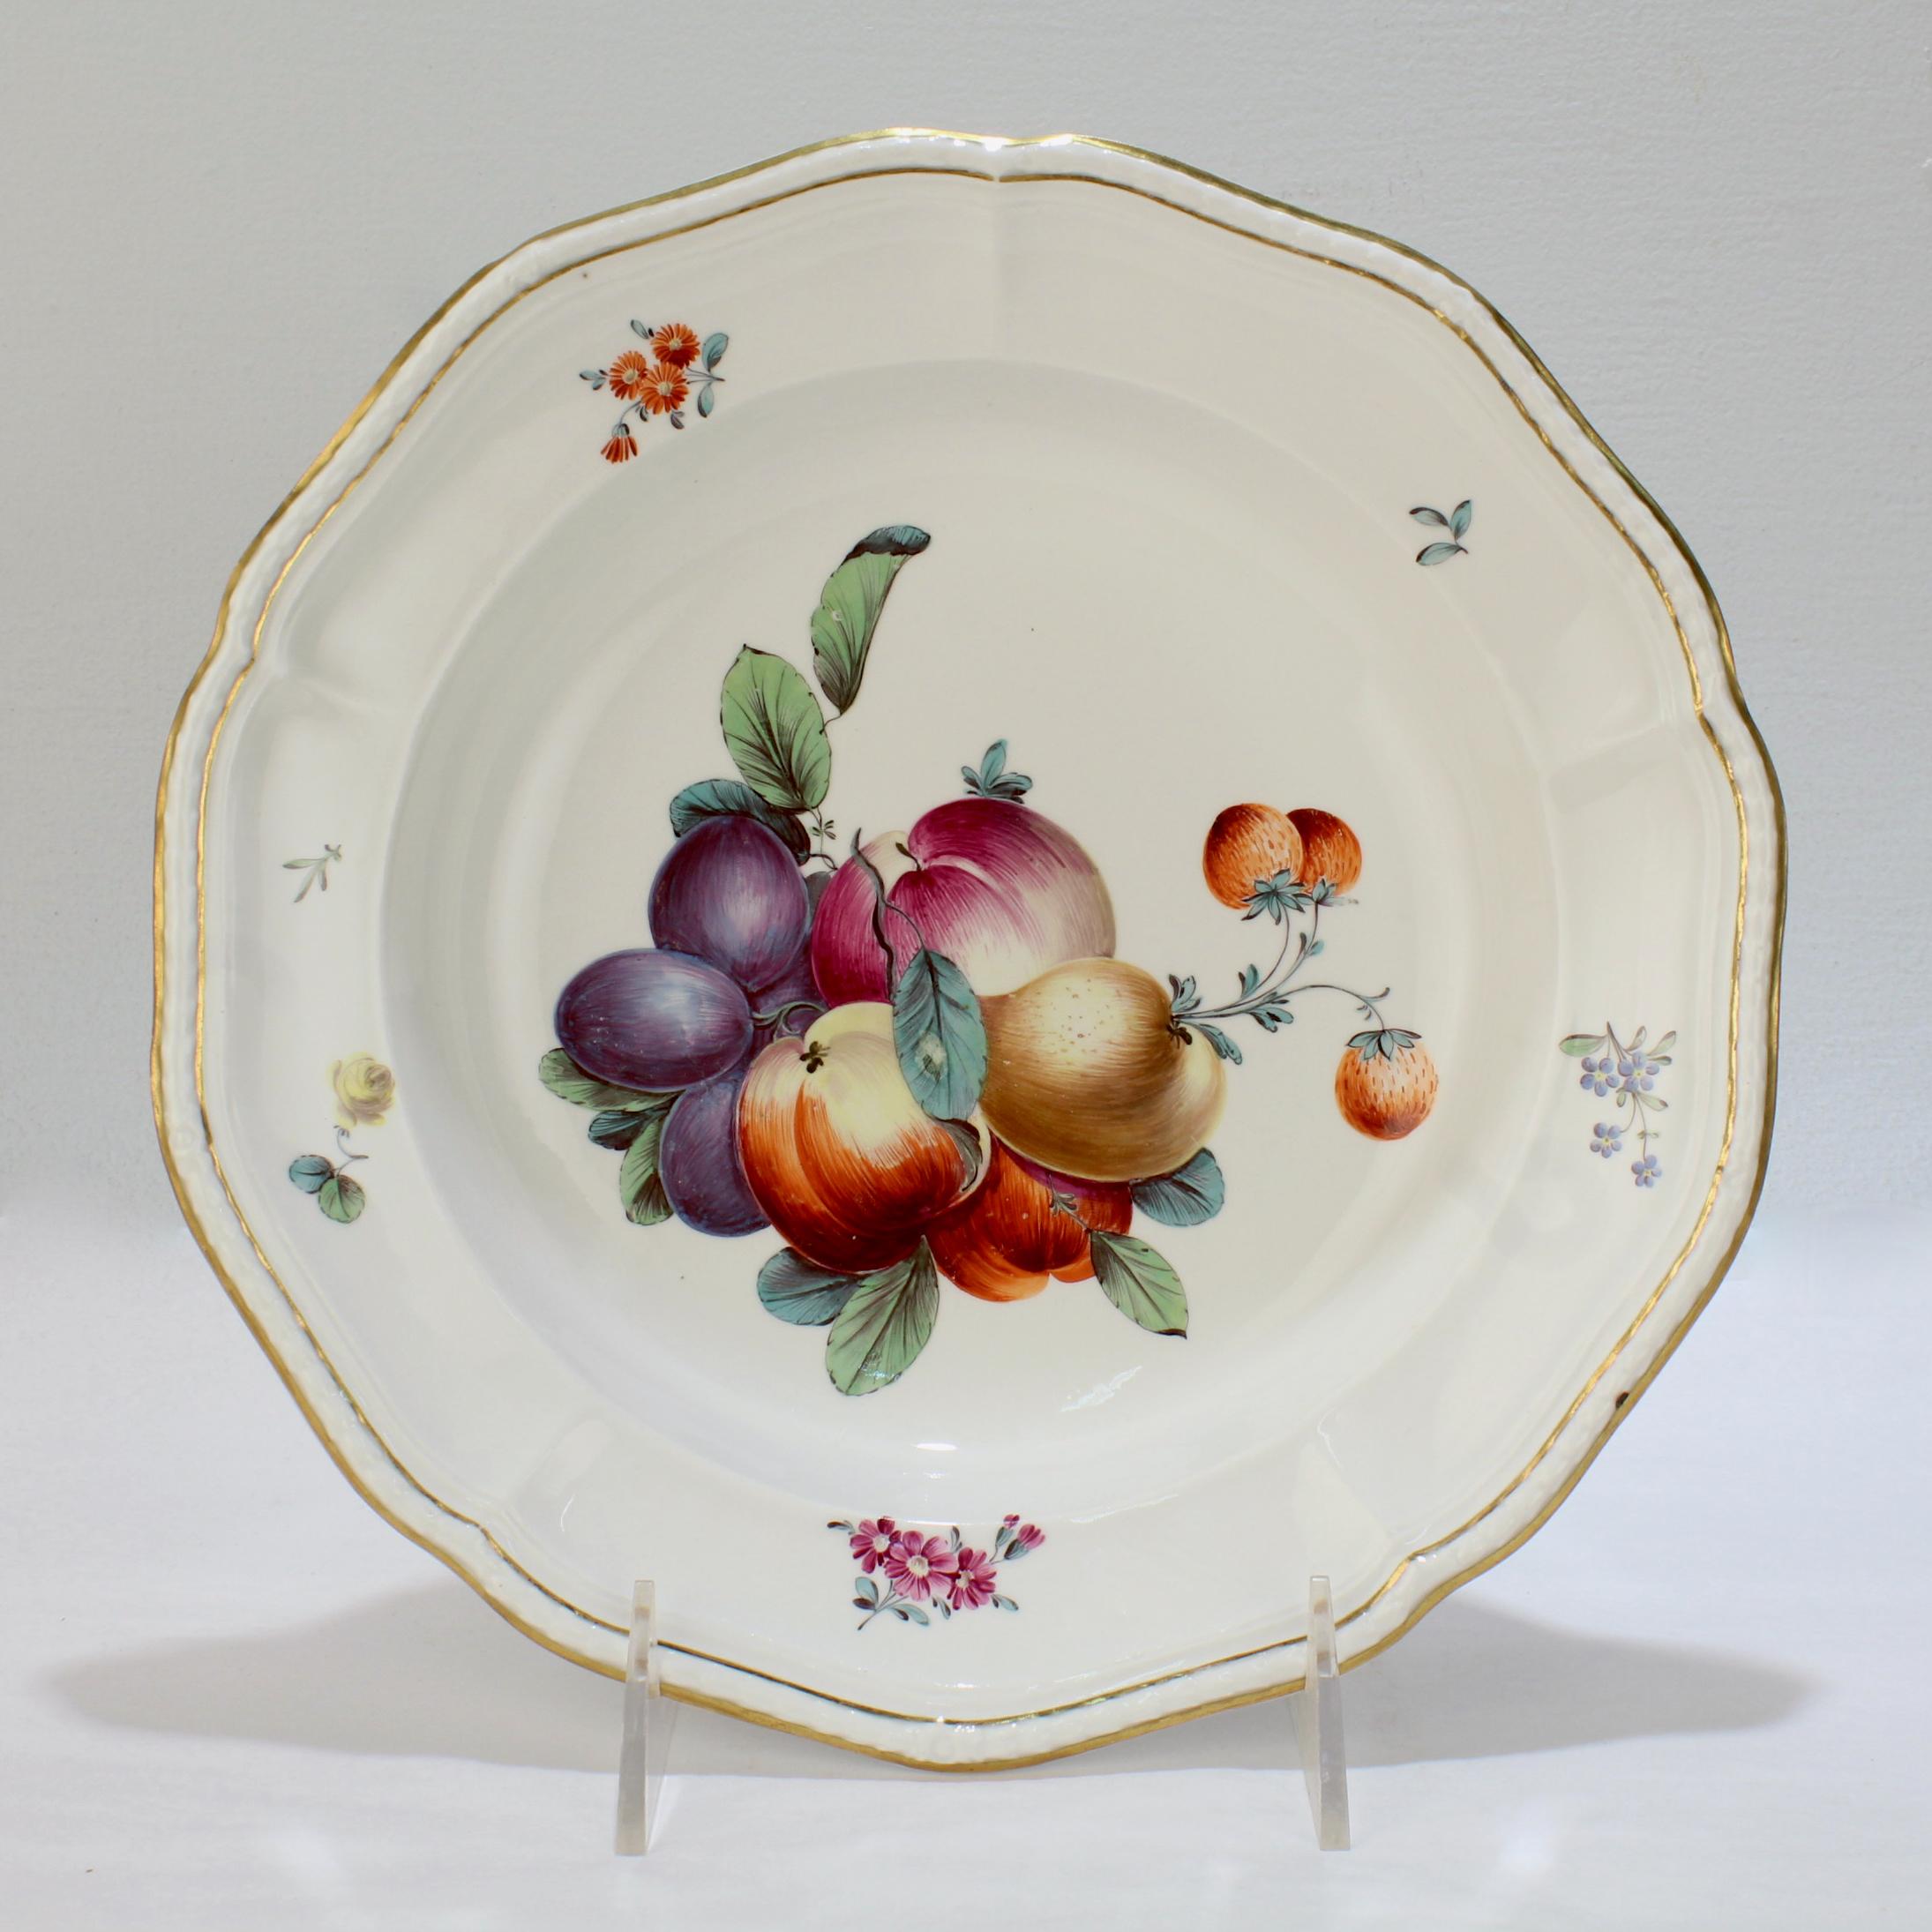 A very fine antique 18th century porcelain bowl.

By Frankenthal during the Carl Theodor period.

With a group of polychrome enamel decorated fruit to the bowl, floral sprays to the border, and a gilt edged, molded rim.

The bowl has black